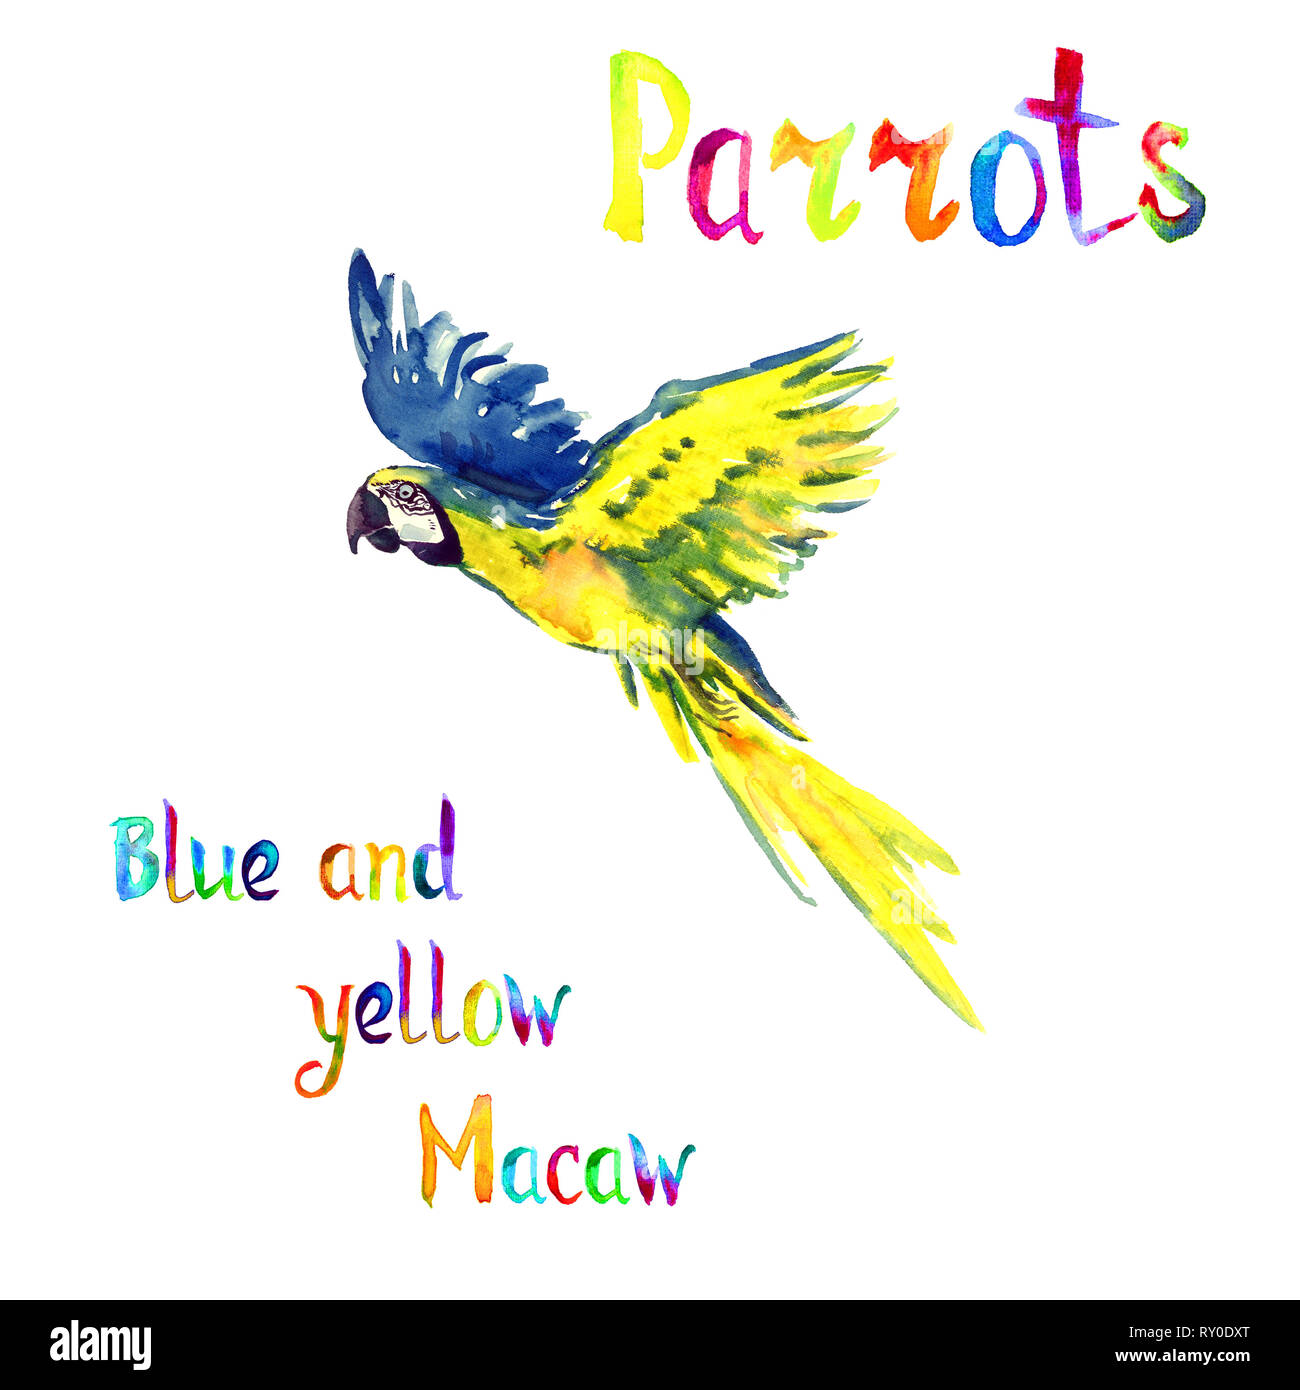 Blue and yellow macaw flying, isolated hand painted watercolor illustration with handwritten inscription Stock Photo